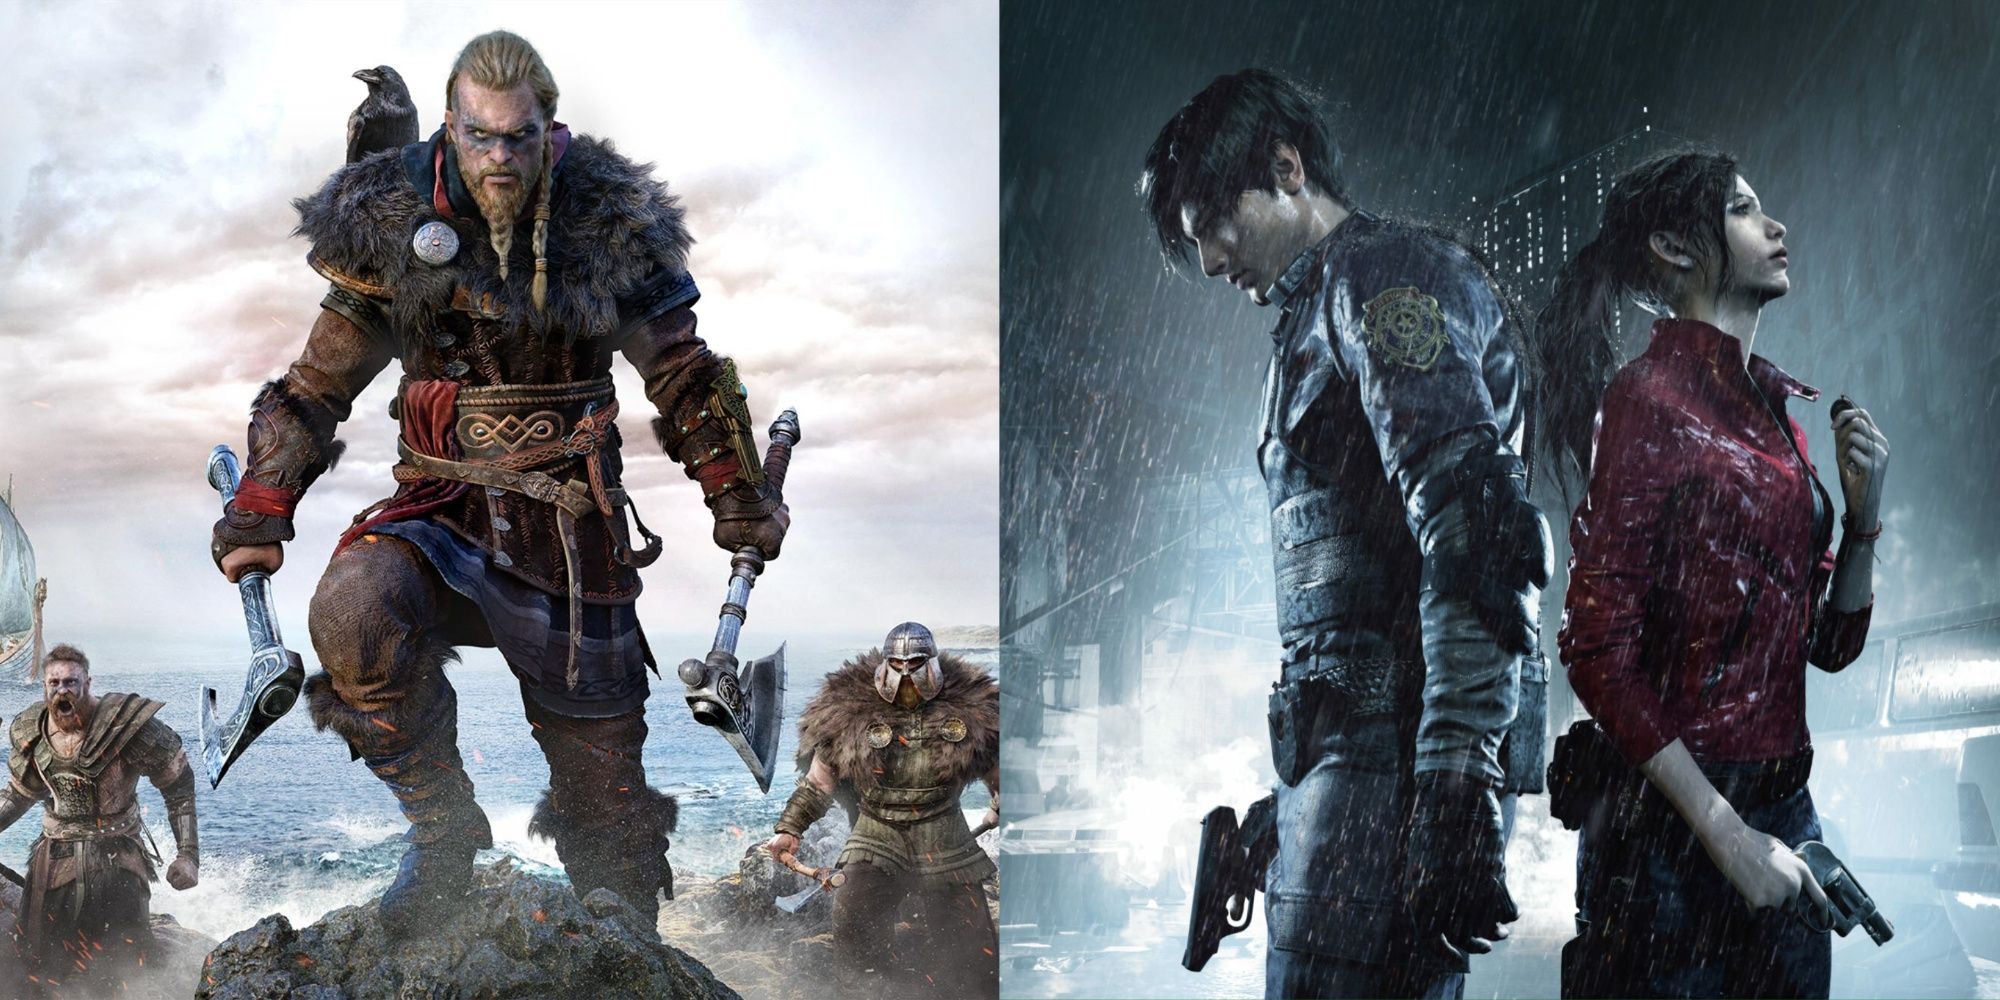 eivor in assassin's creed valhalla, and resident evil 2 characters in the rain